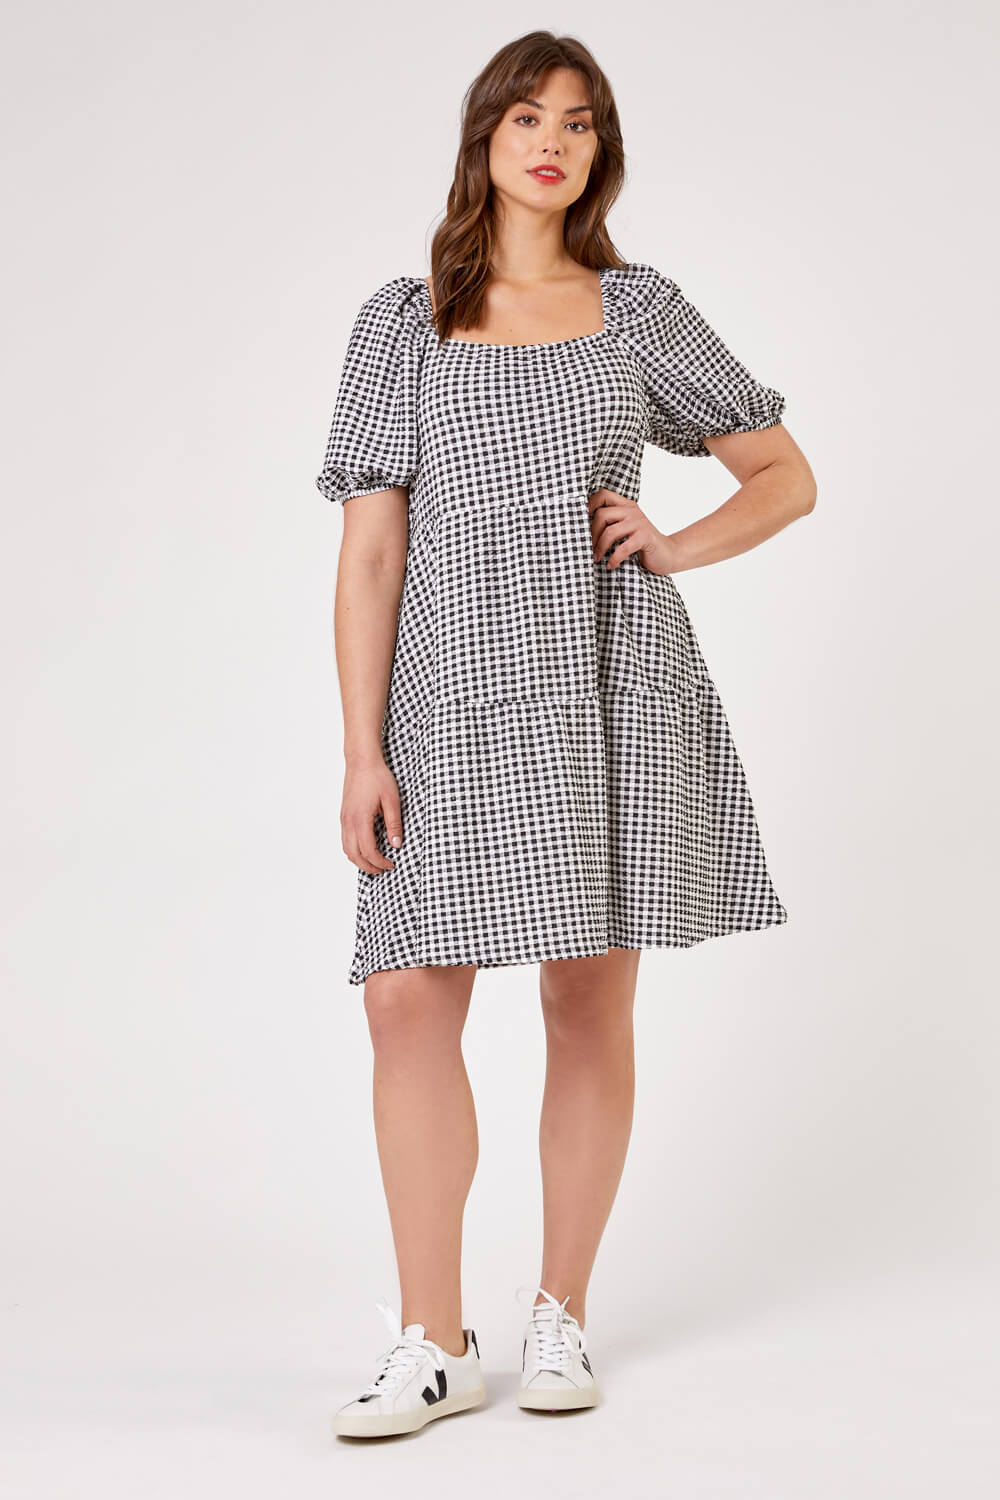 Black Curve Gingham Print Tiered Dress, Image 3 of 5